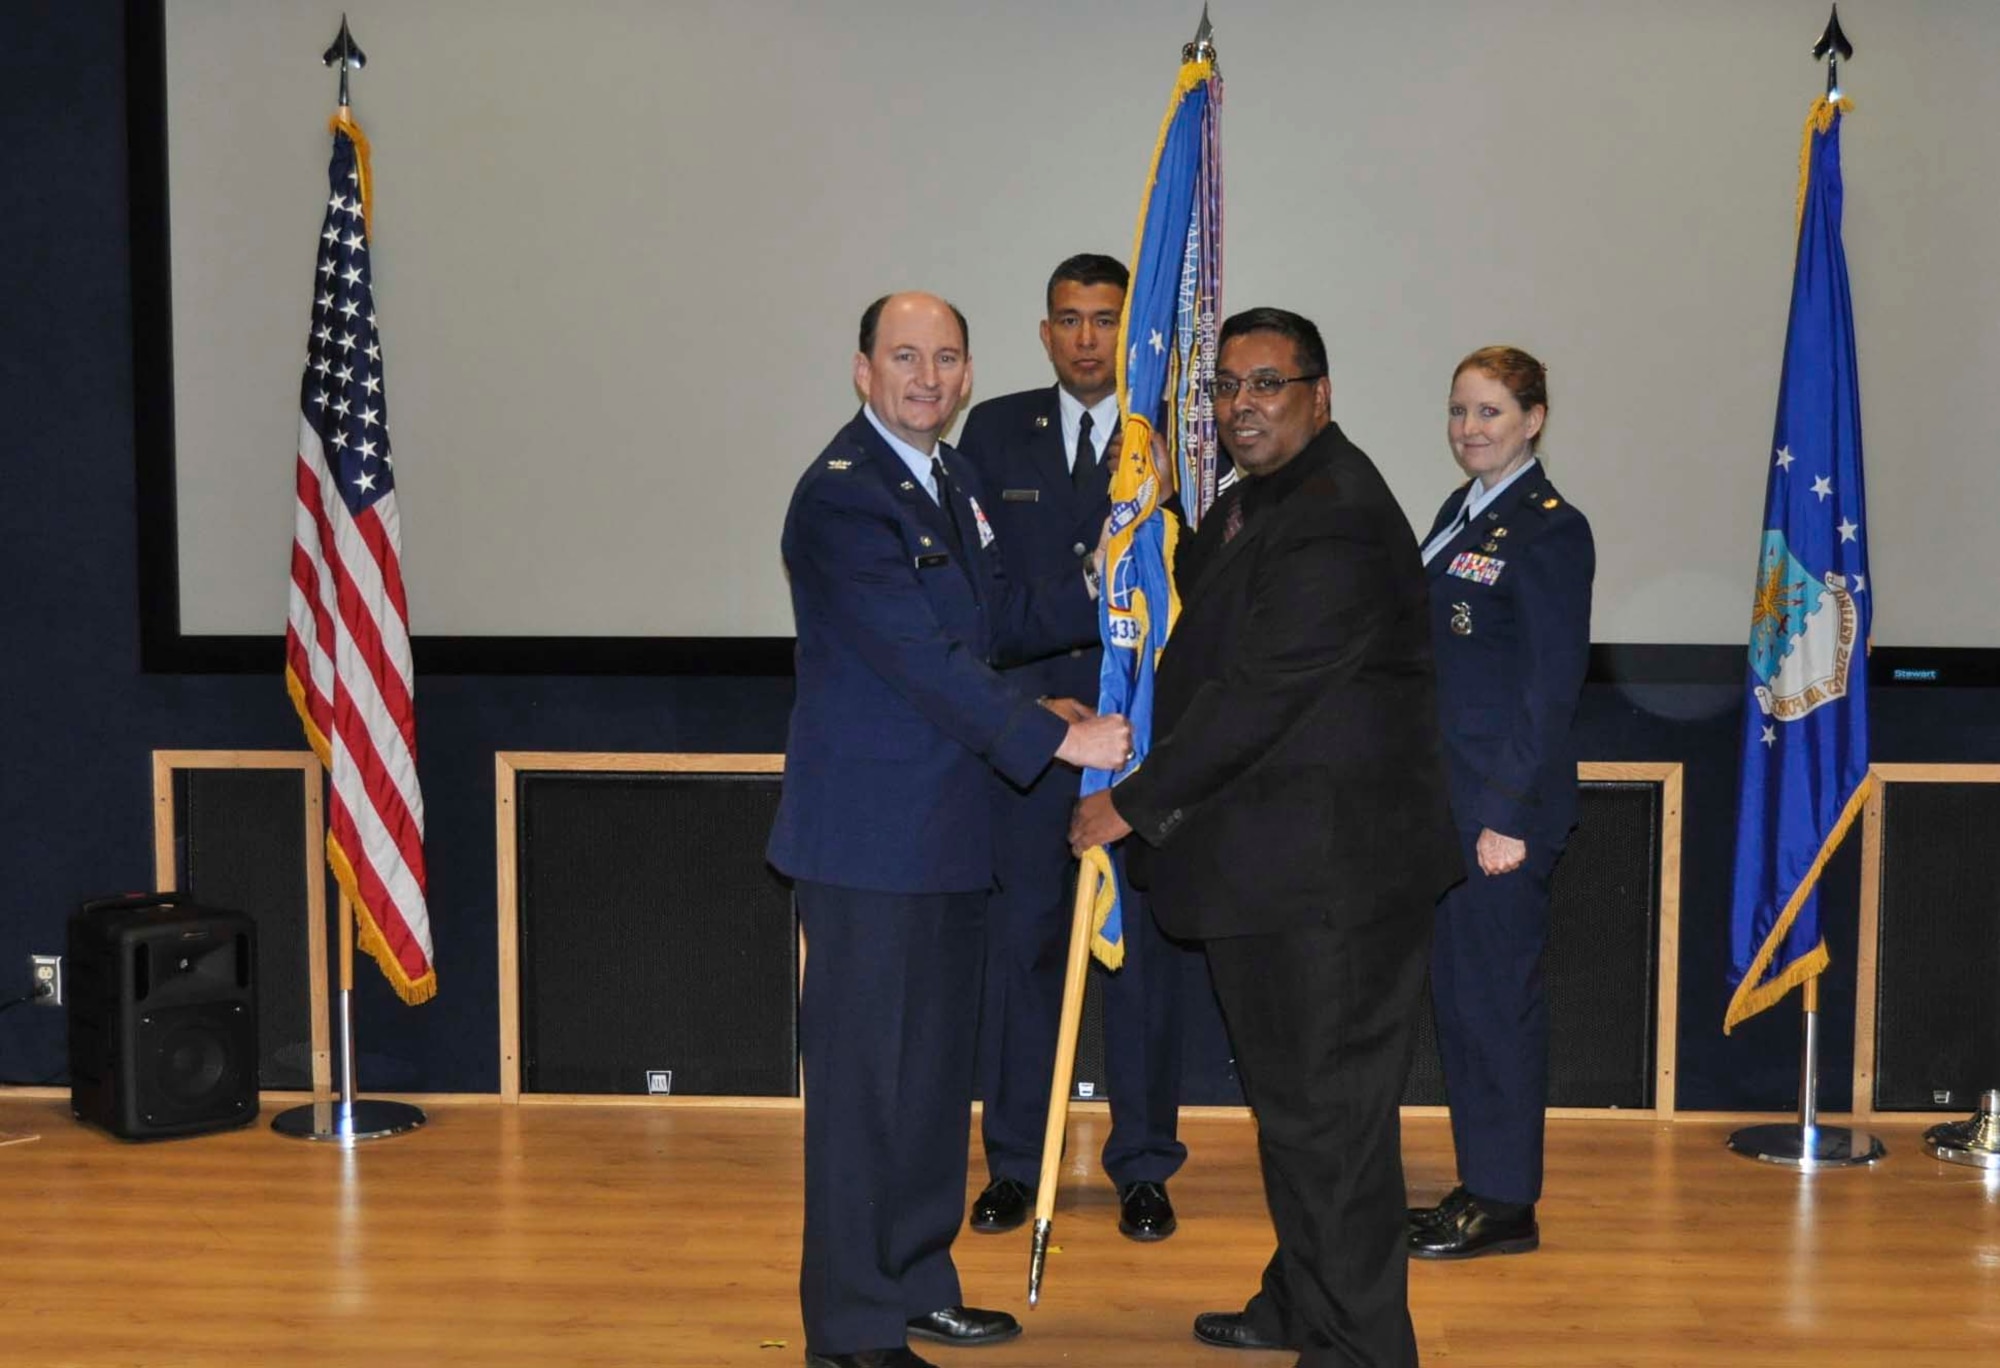 John Smith accepts the 433rd Airlift Wing guidon from Col. Thomas K. Smith, Jr., 433rd AW commander, during the Honorary Commanders Induction Ceremony held at Joint Base San Antonio-Lackland April 30, 2016. Smith is currently a general attorney for the Department of Homeland Security and will be serving as the 433rd Security Forces Squadron Honorary Commander. (U.S. Air Force photo/Senior Airman Bryan Swink)